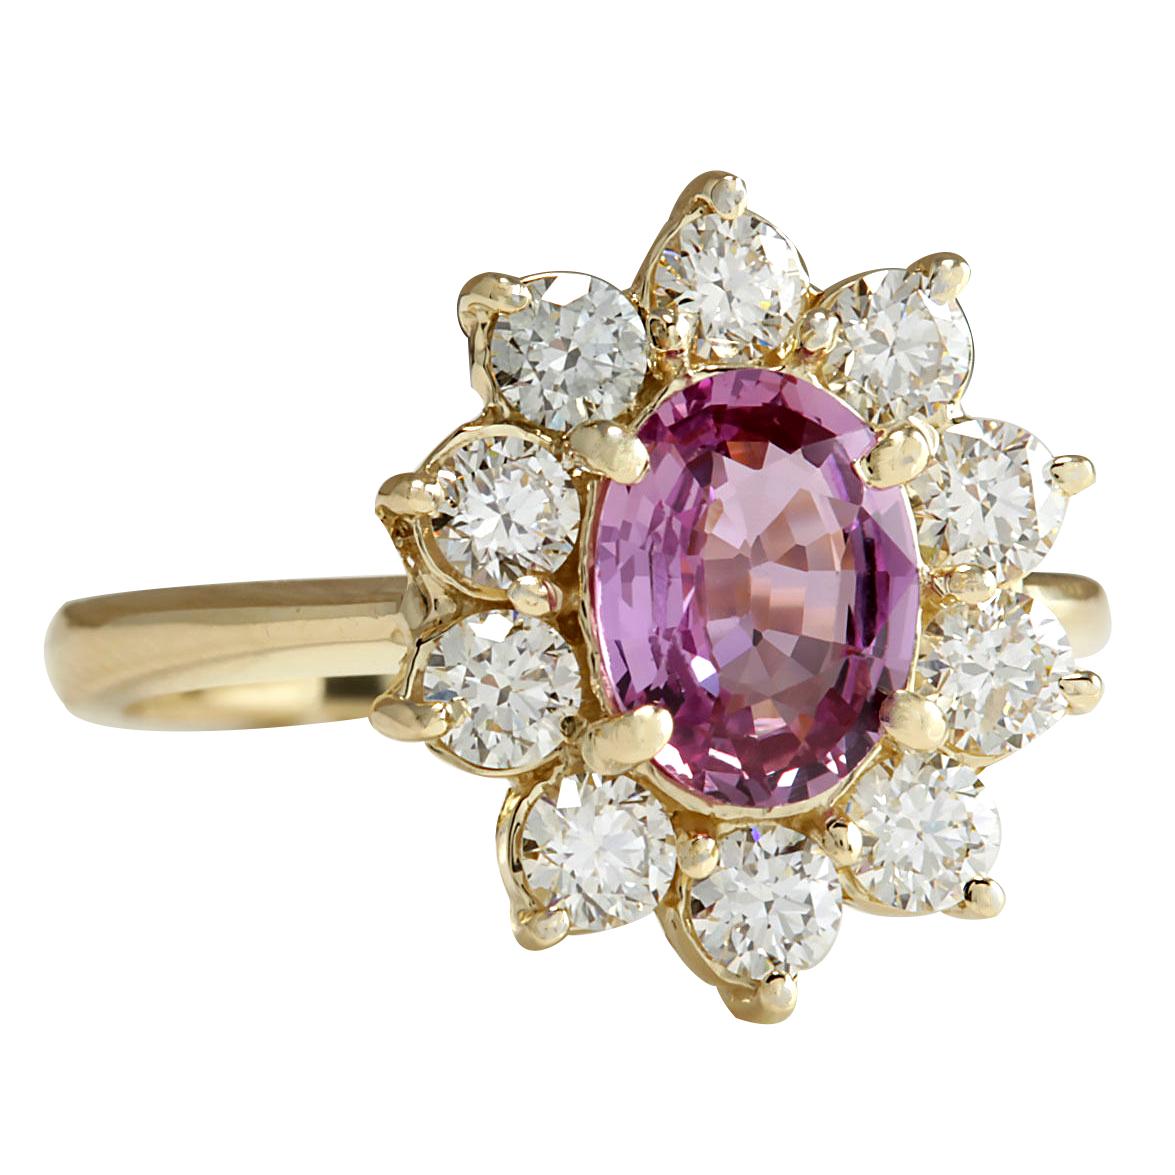 2.37 Carat Natural Ceylon Sapphire 14 Karat Yellow Gold Diamond Ring
Stamped: 14K Yellow Gold
Total Ring Weight: 4.5 Grams
Total Natural Ceylon Sapphire Weight is 1.37 Carat (Measures: 8.00x6.00 mm)
Color: Pink
Total Natural Diamond Weight is 1.00